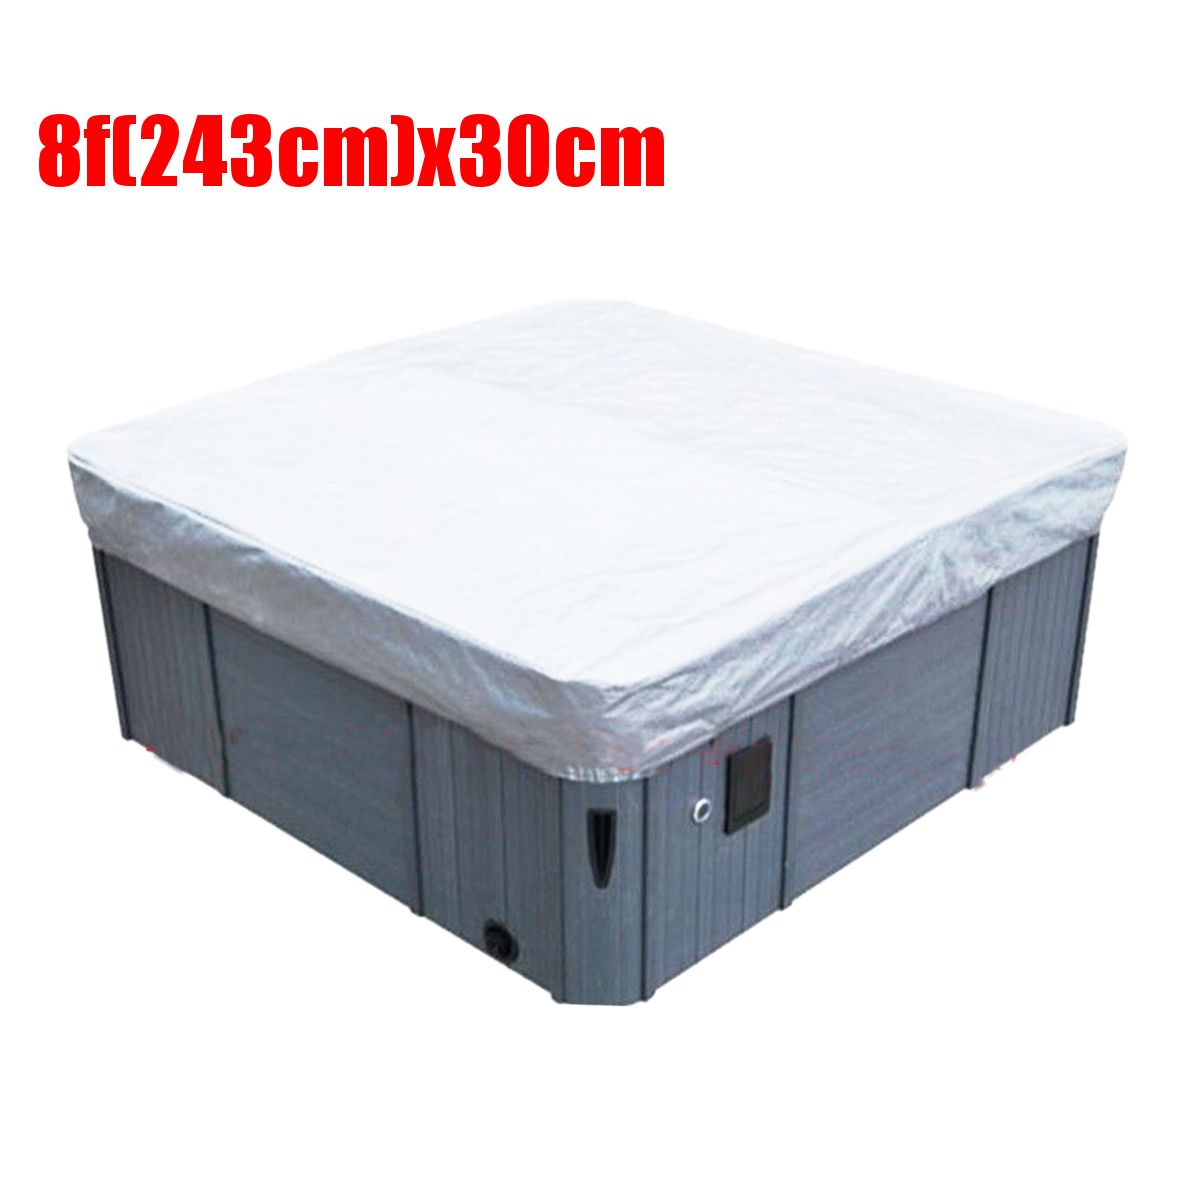 78Ft-4-Types-Silver-UV-Proof-Spa-Hot-Tub-Cover-Cap-for-Jacuzzi-Hotspring-Calspa-1731522